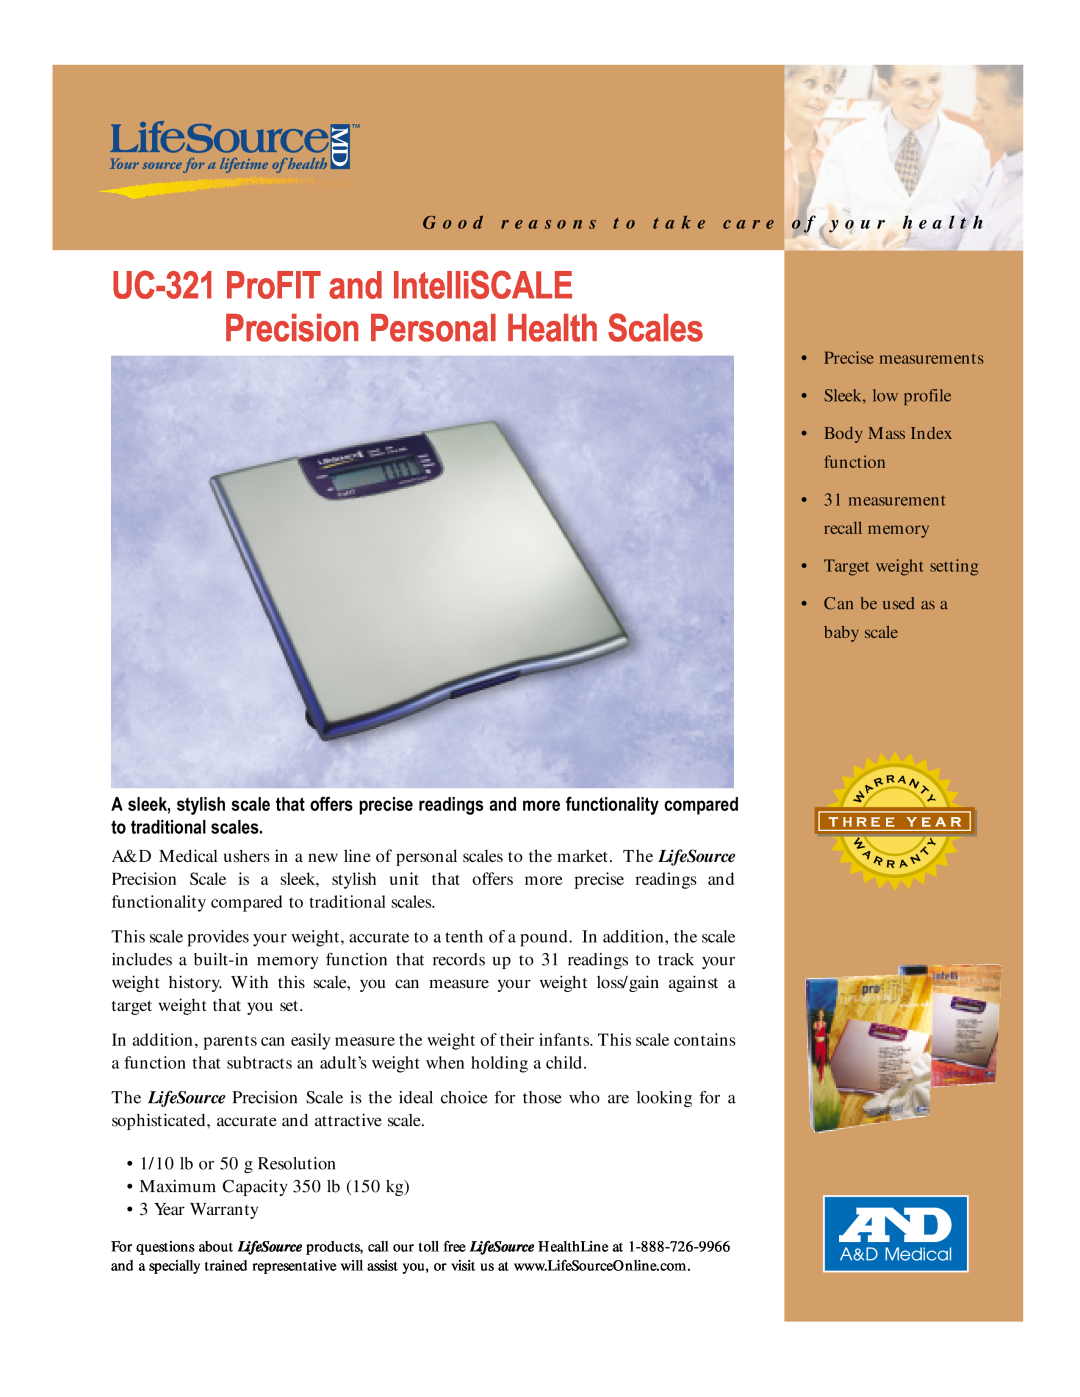 LifeSource manual UC-321 ProFIT and IntelliSCALE Precision Personal Health Scales 